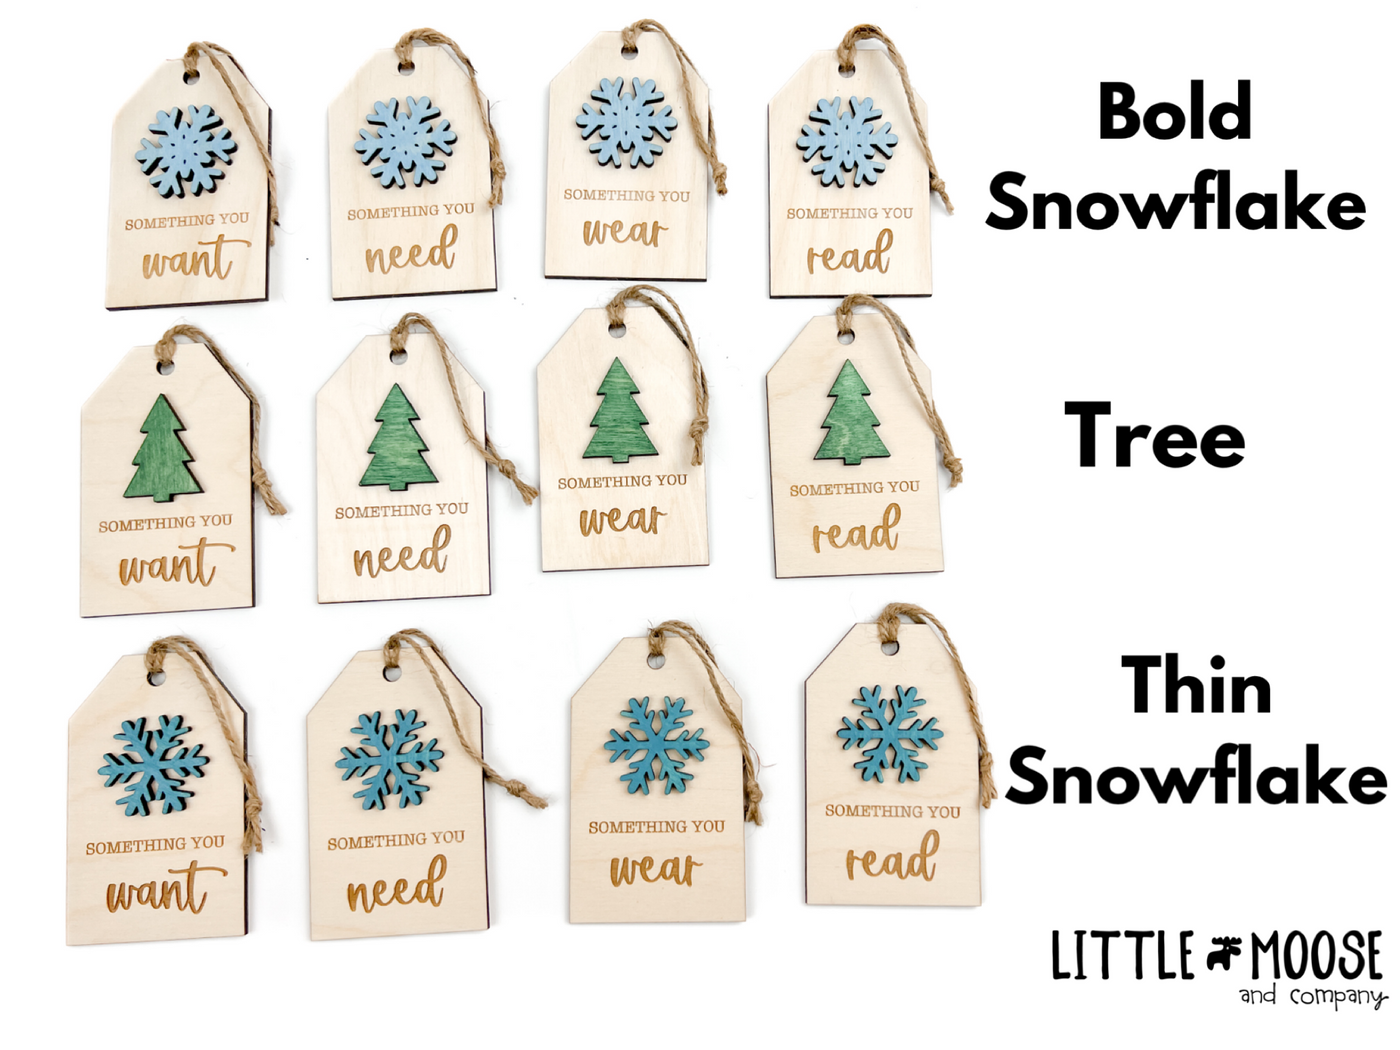 Tags - Want, Need, Wear, Read - snowflake and tree